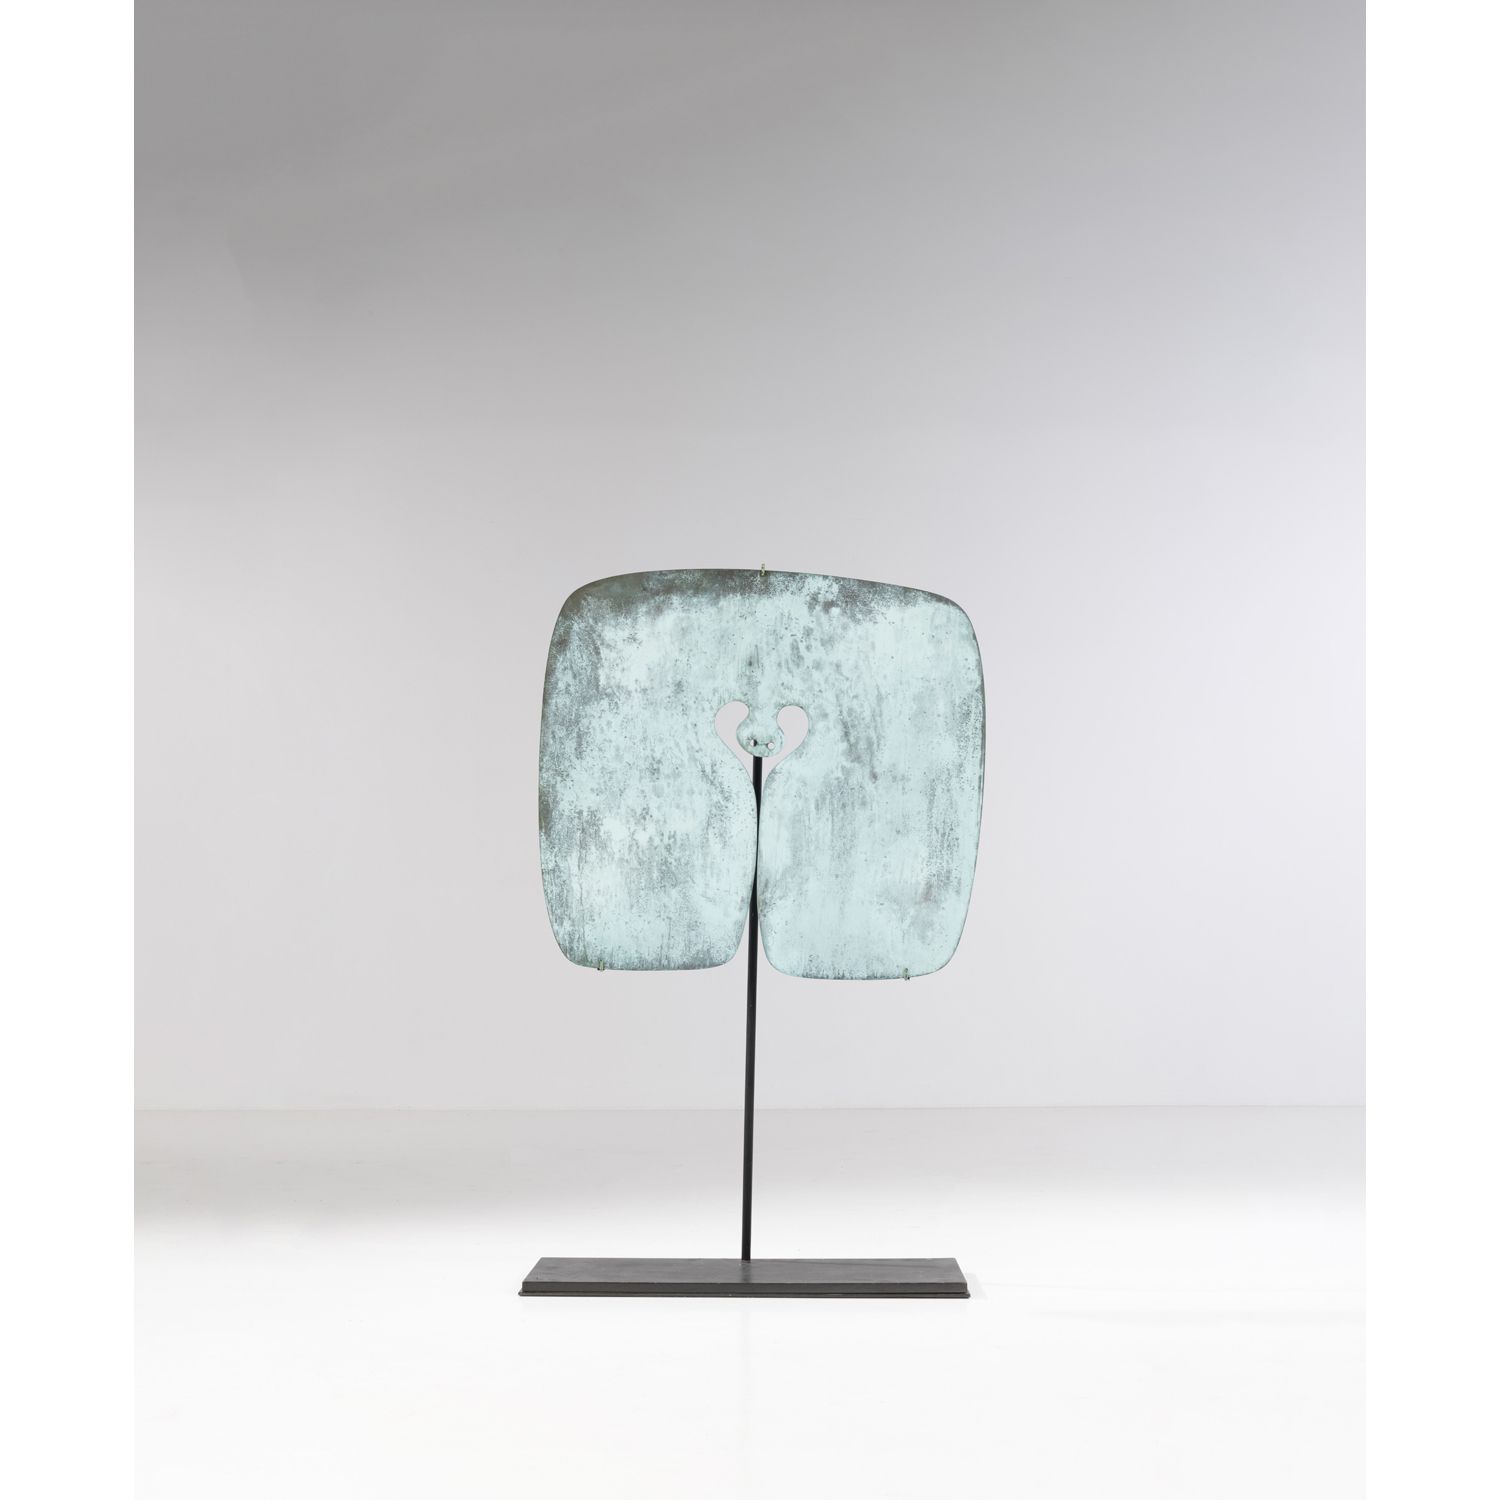 Null Harry Bertoia (1915-1978)

Gong

Sculpture

Patinated bronze, wood and stee&hellip;